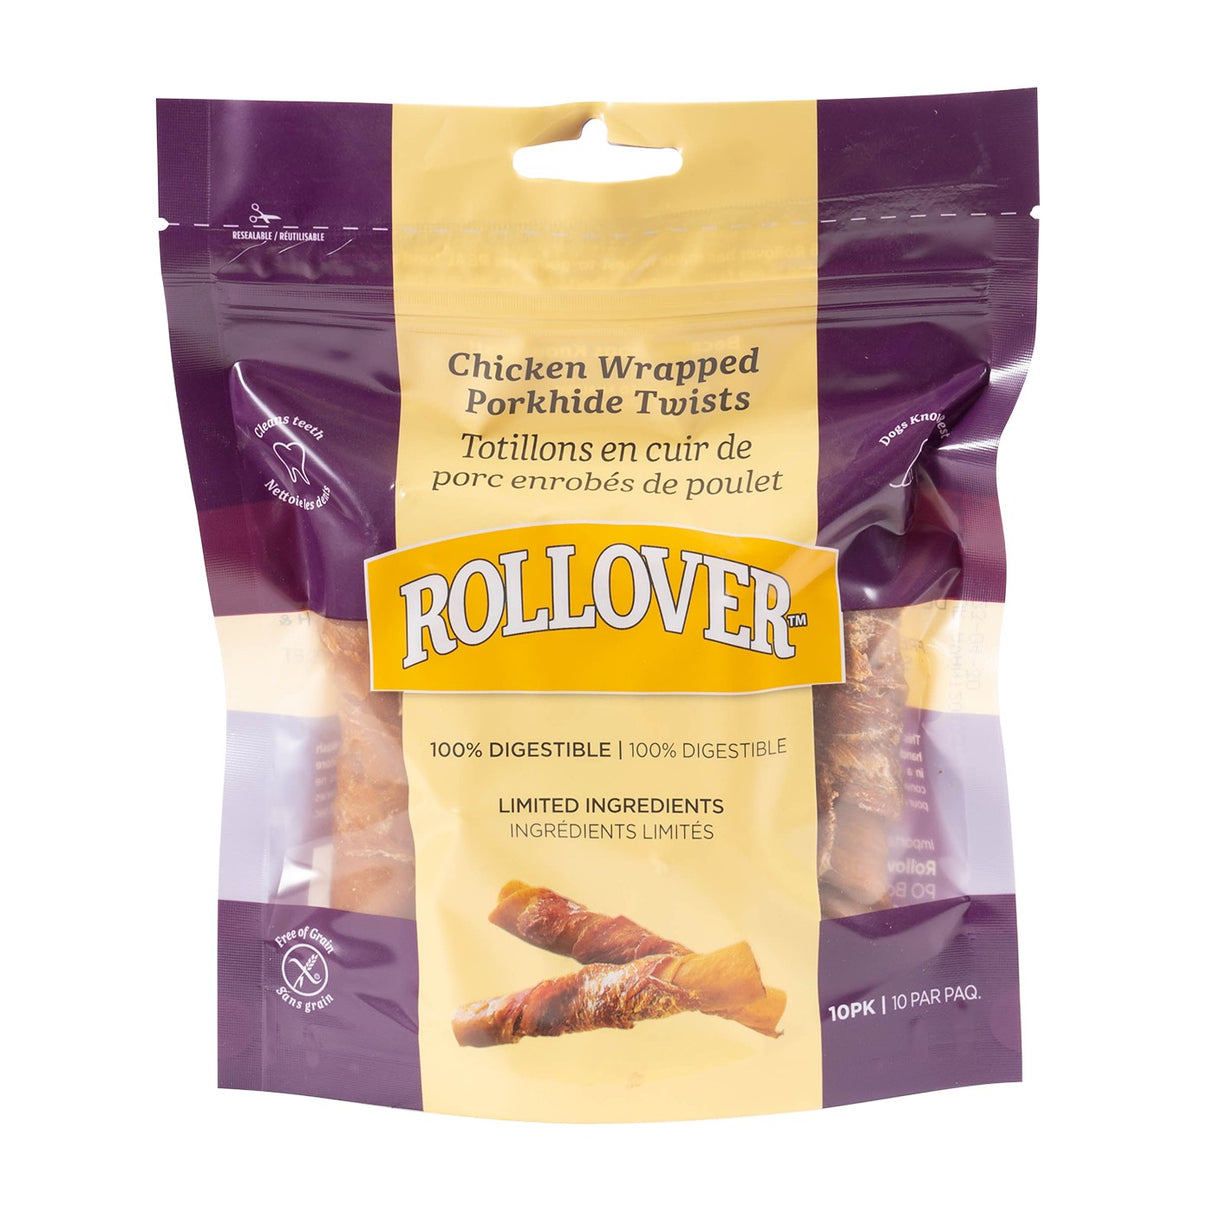 Rollover Chicken Wrapped Pork Hide Twists 10 Pack